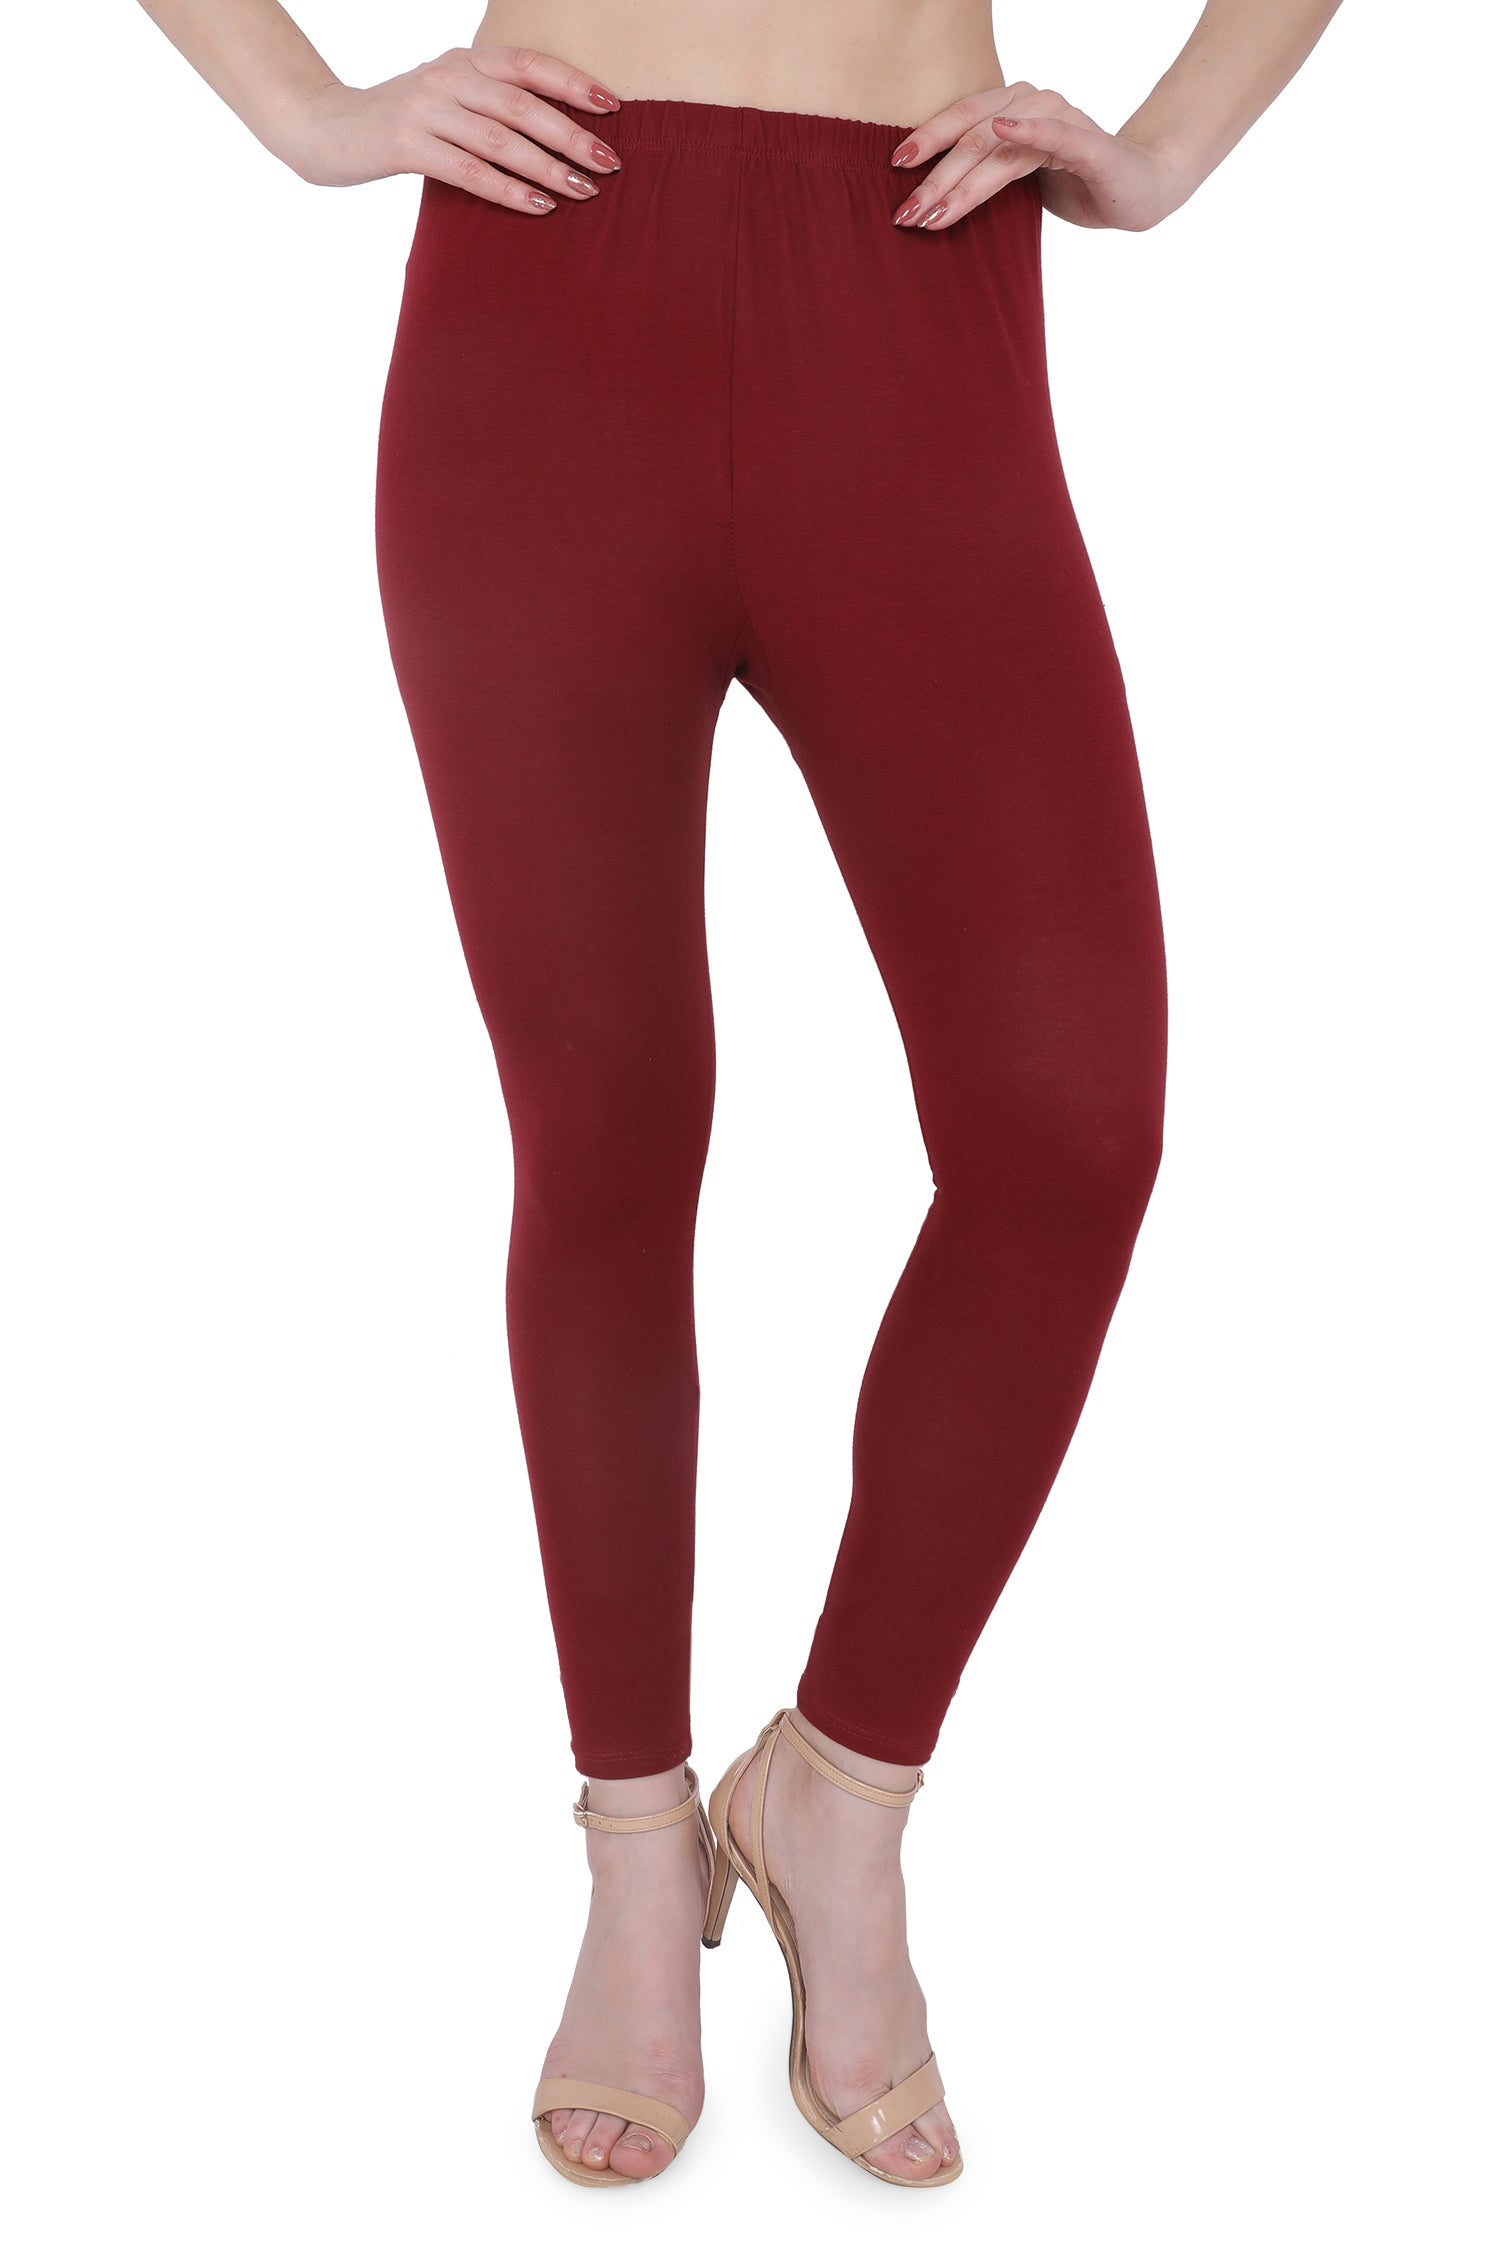 Buy BFAM Presents - Cotton Regular fit Leggings for Girls,Soft Cotton,Soft  Fabric, Ankle Length,Multi Color Online In India At Discounted Prices